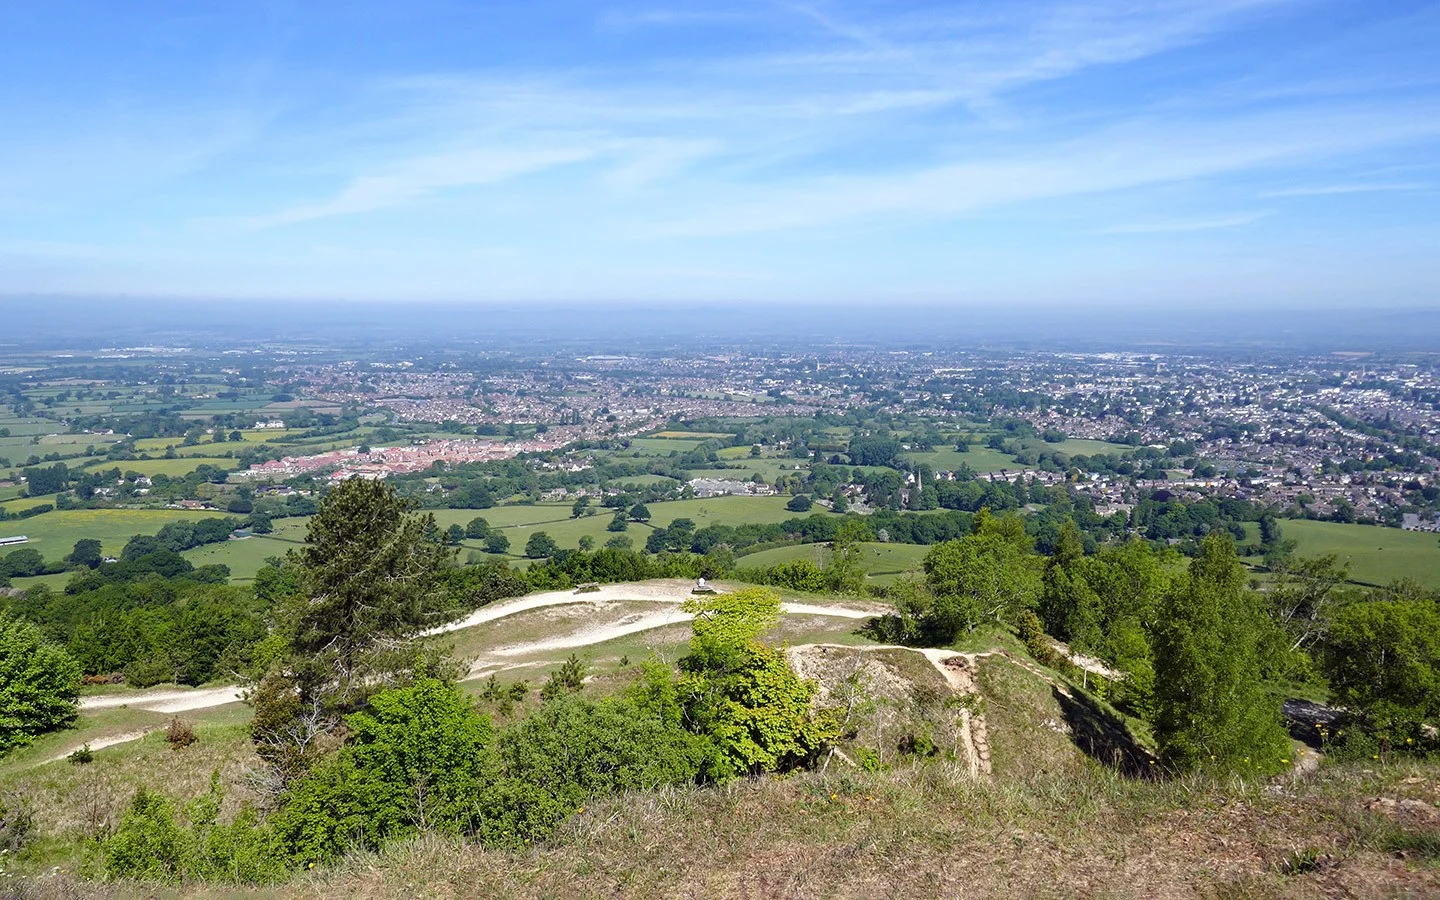 Views from Leckhampton Hill outside Cheltenham in the Cotswolds